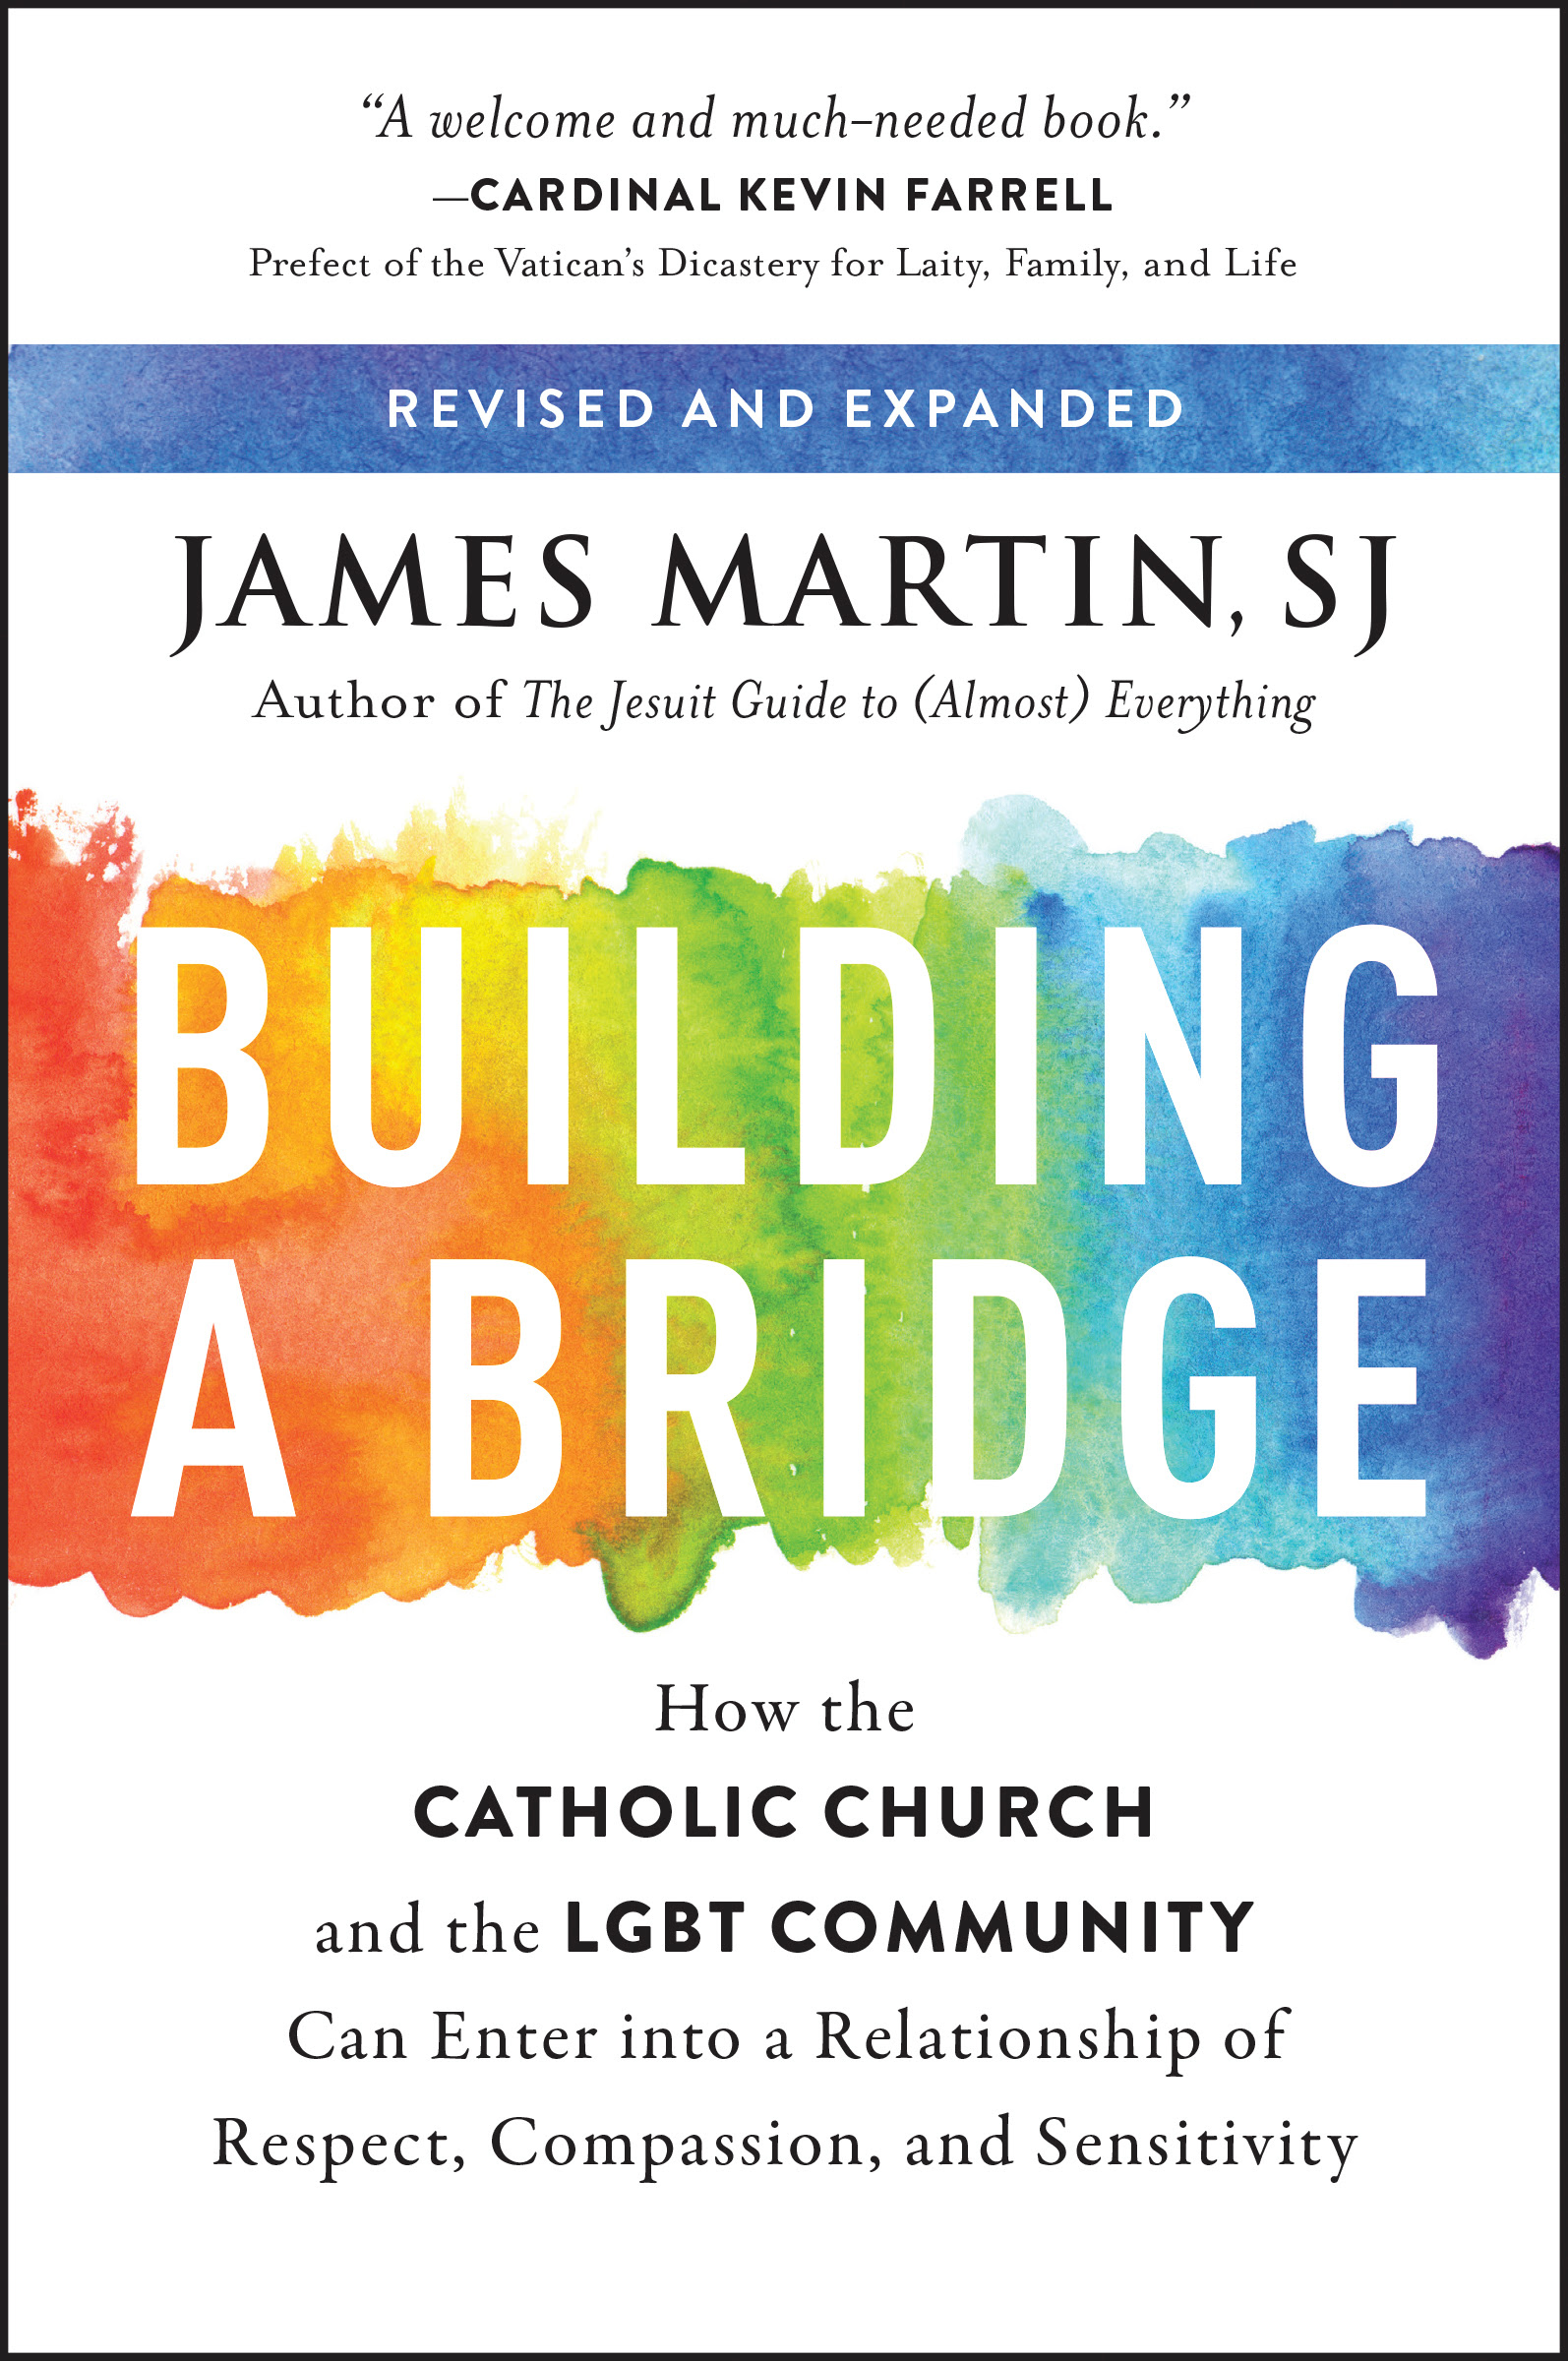 Book cover image for the book Building a Bridge